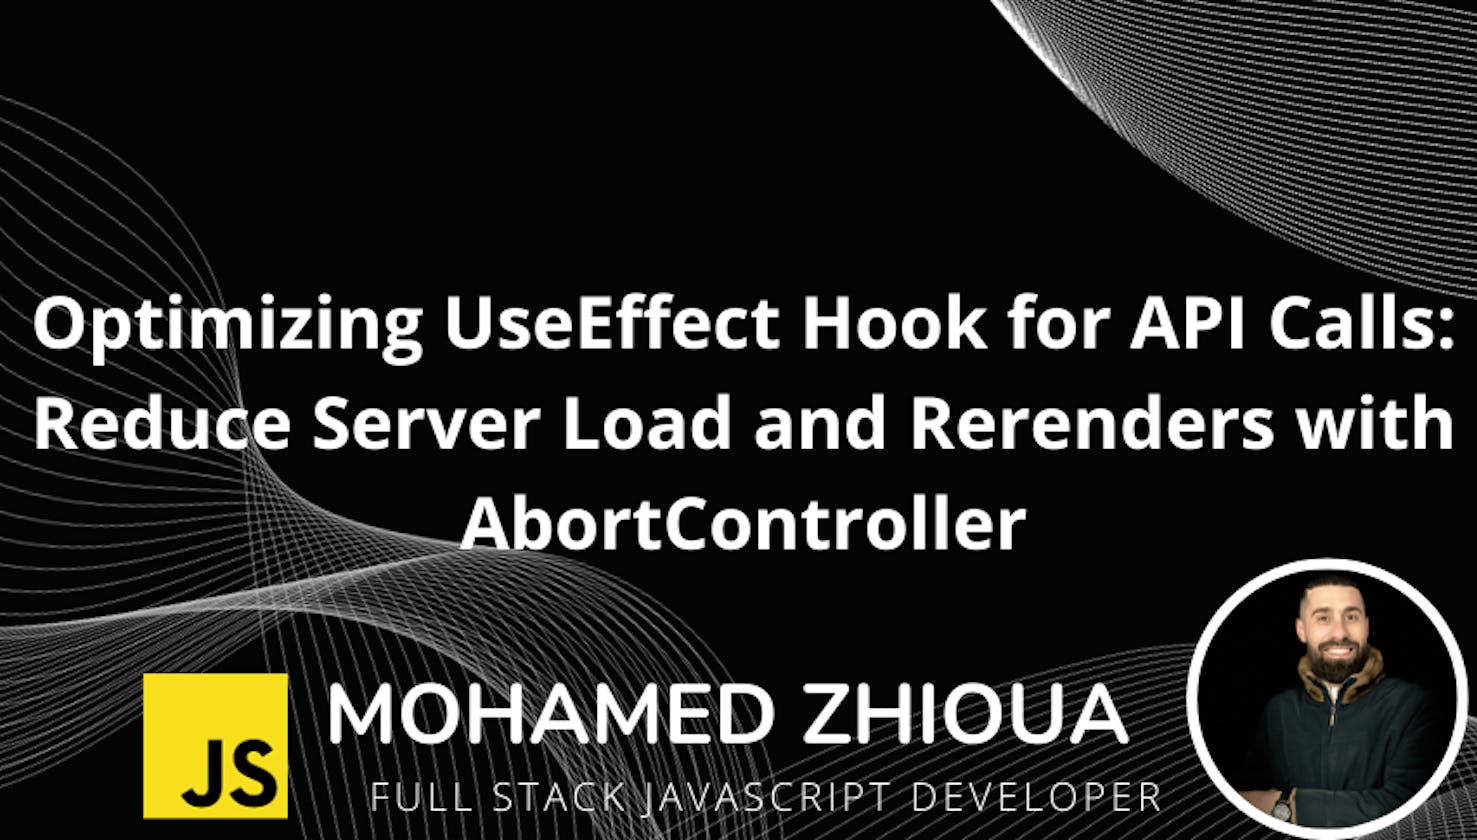 Optimizing UseEffect Hook for API Calls: Reduce Server Load and Rerenders with AbortController